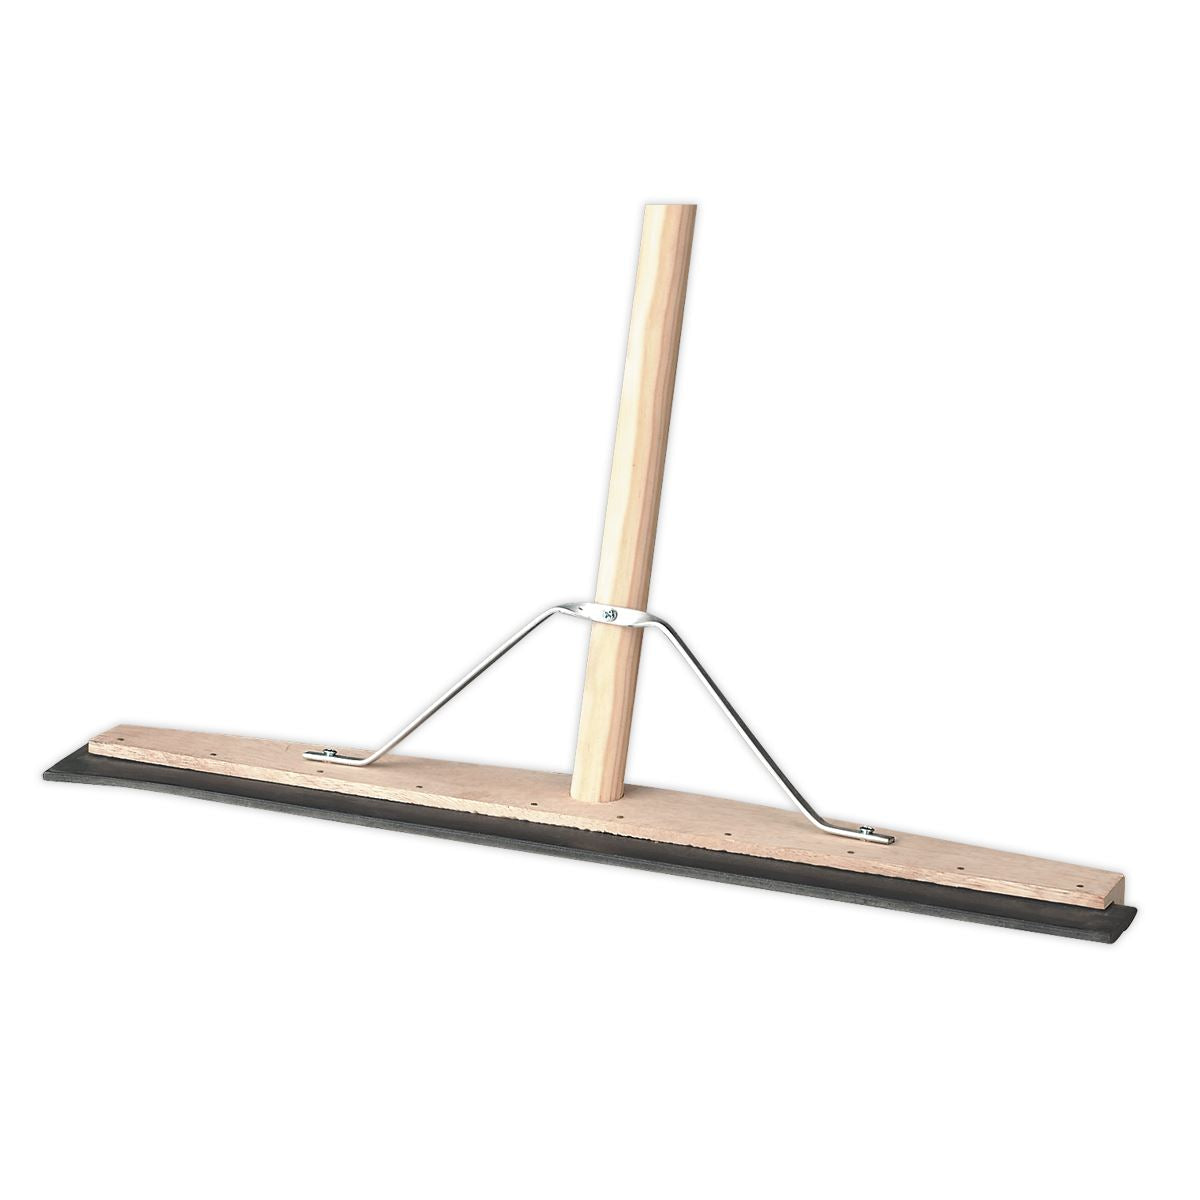 Sealey Rubber Floor Squeegee 24"(600mm) with Wooden Handle